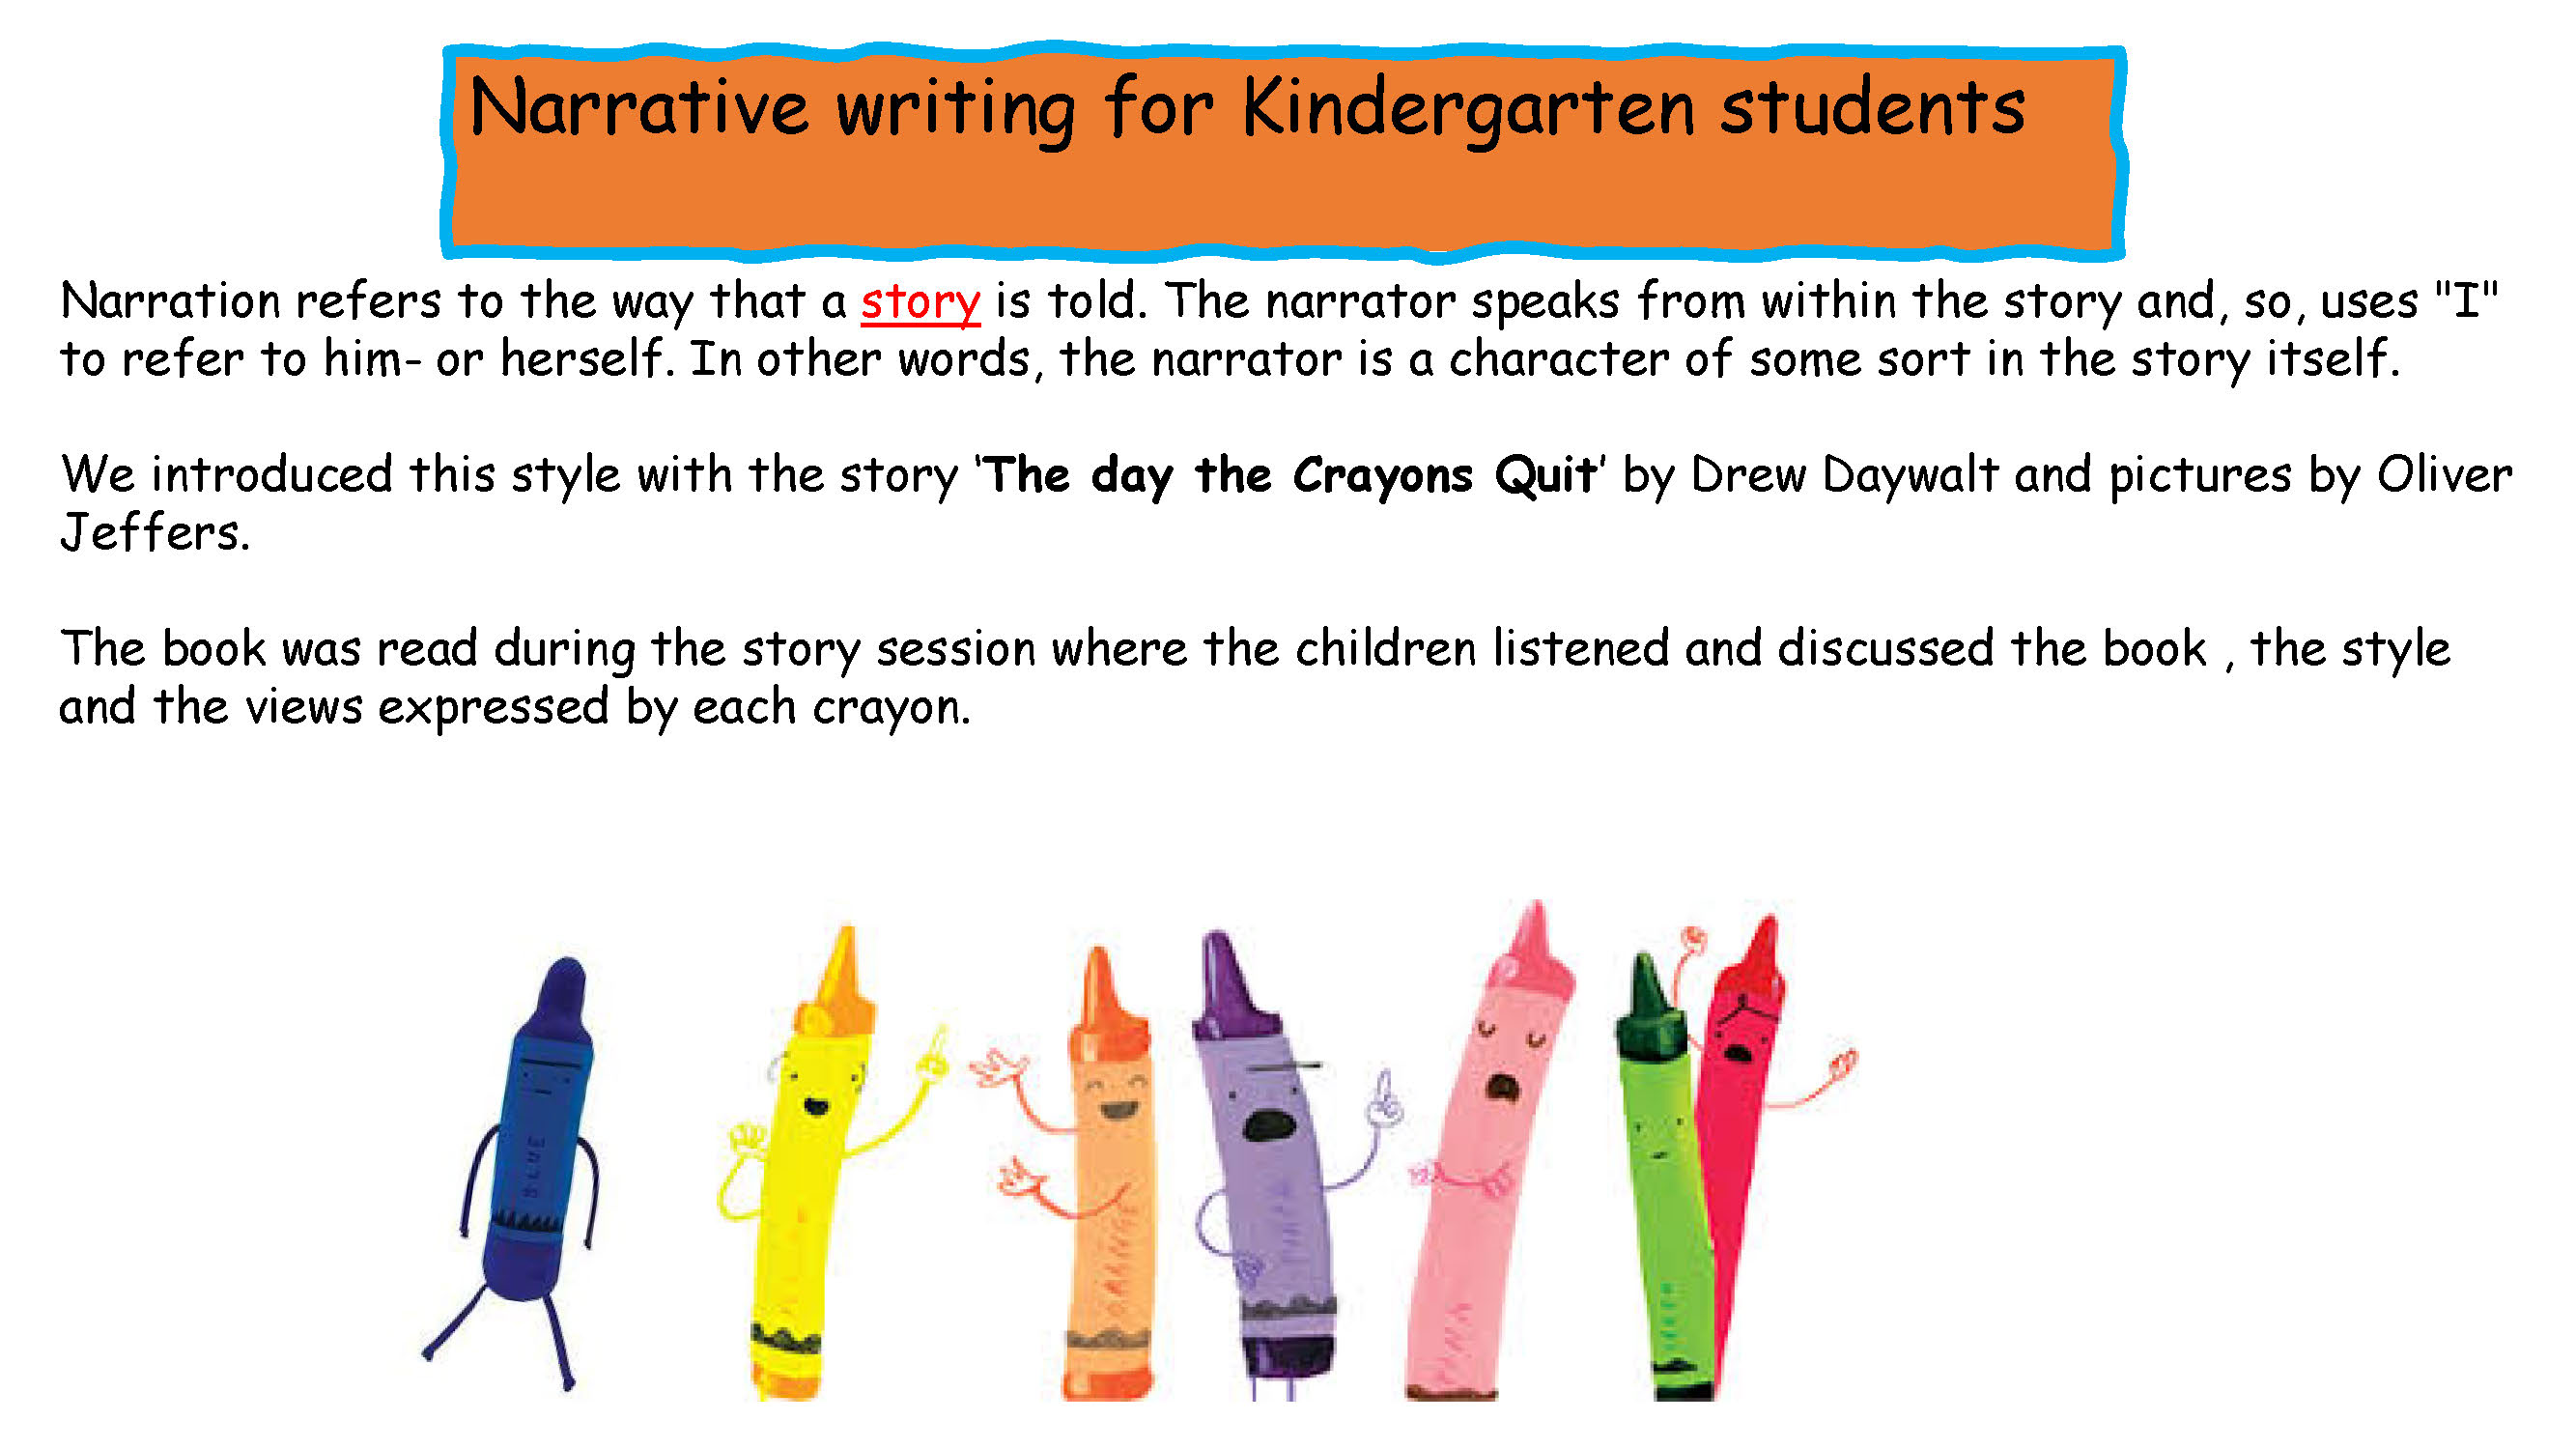 Narrative writing in Early Years